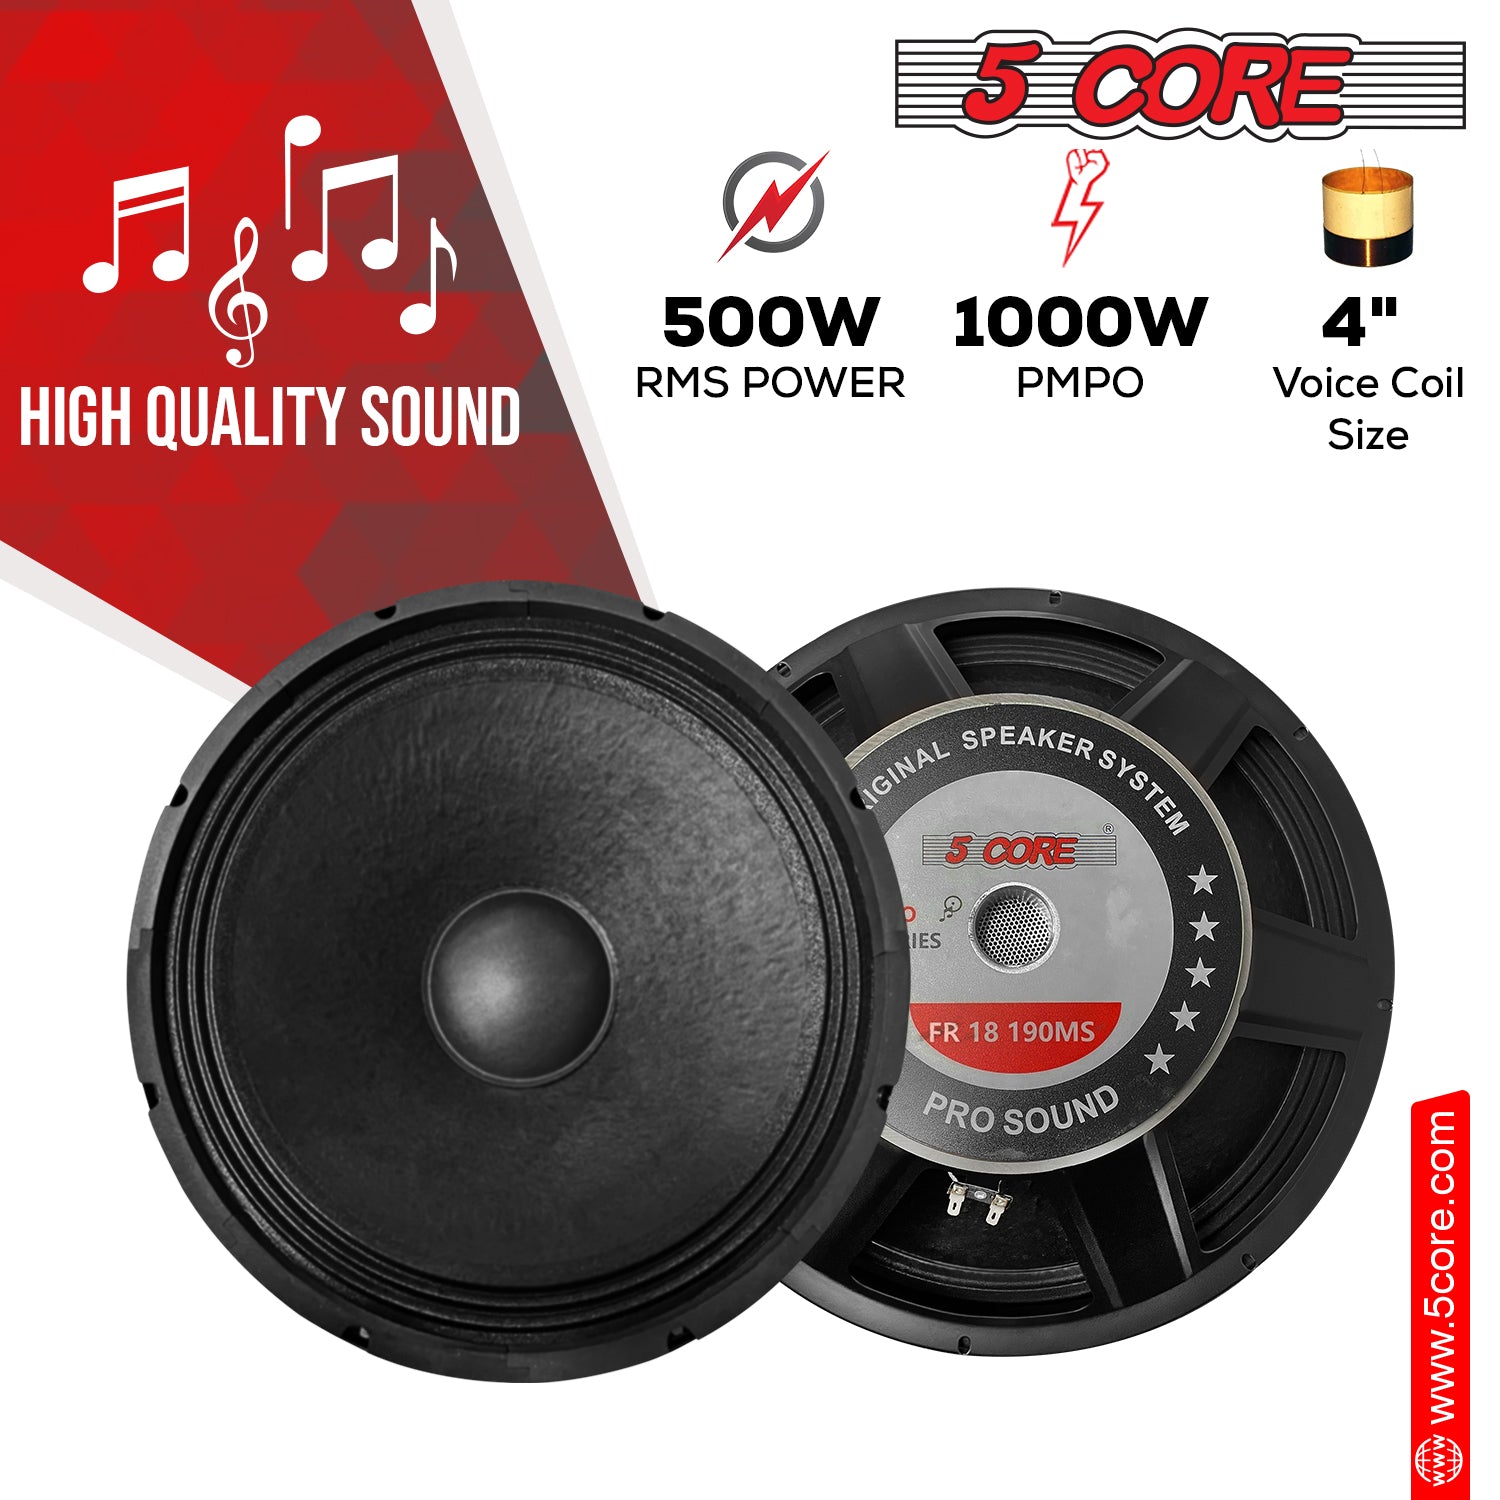 18 Inch Full Range Speaker, boasting 500W RMS, 1000w PMPO and a 4-inch CCAW Voice Coil for enhanced efficiency and performance.